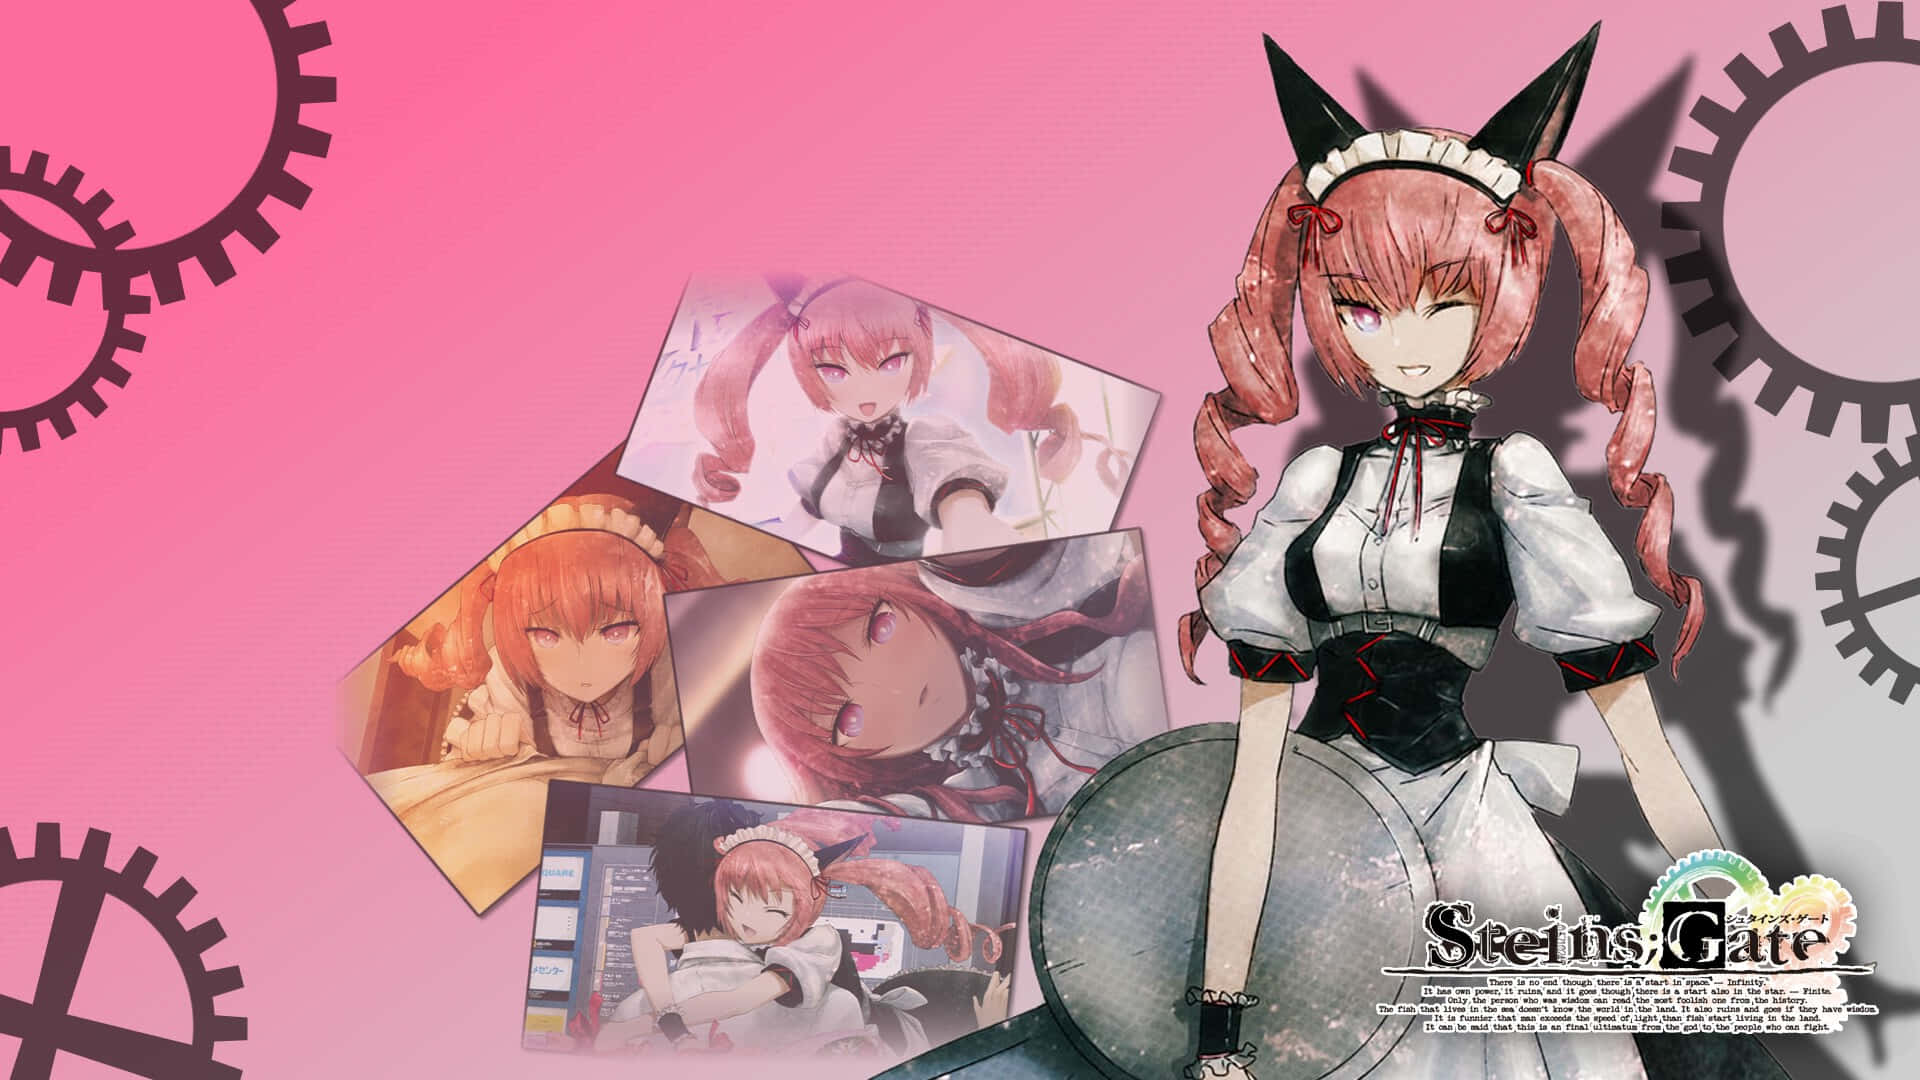 Faris Nyannyan, the playful and feisty character from Steins;Gate, posing in a captivating digital artwork. Wallpaper